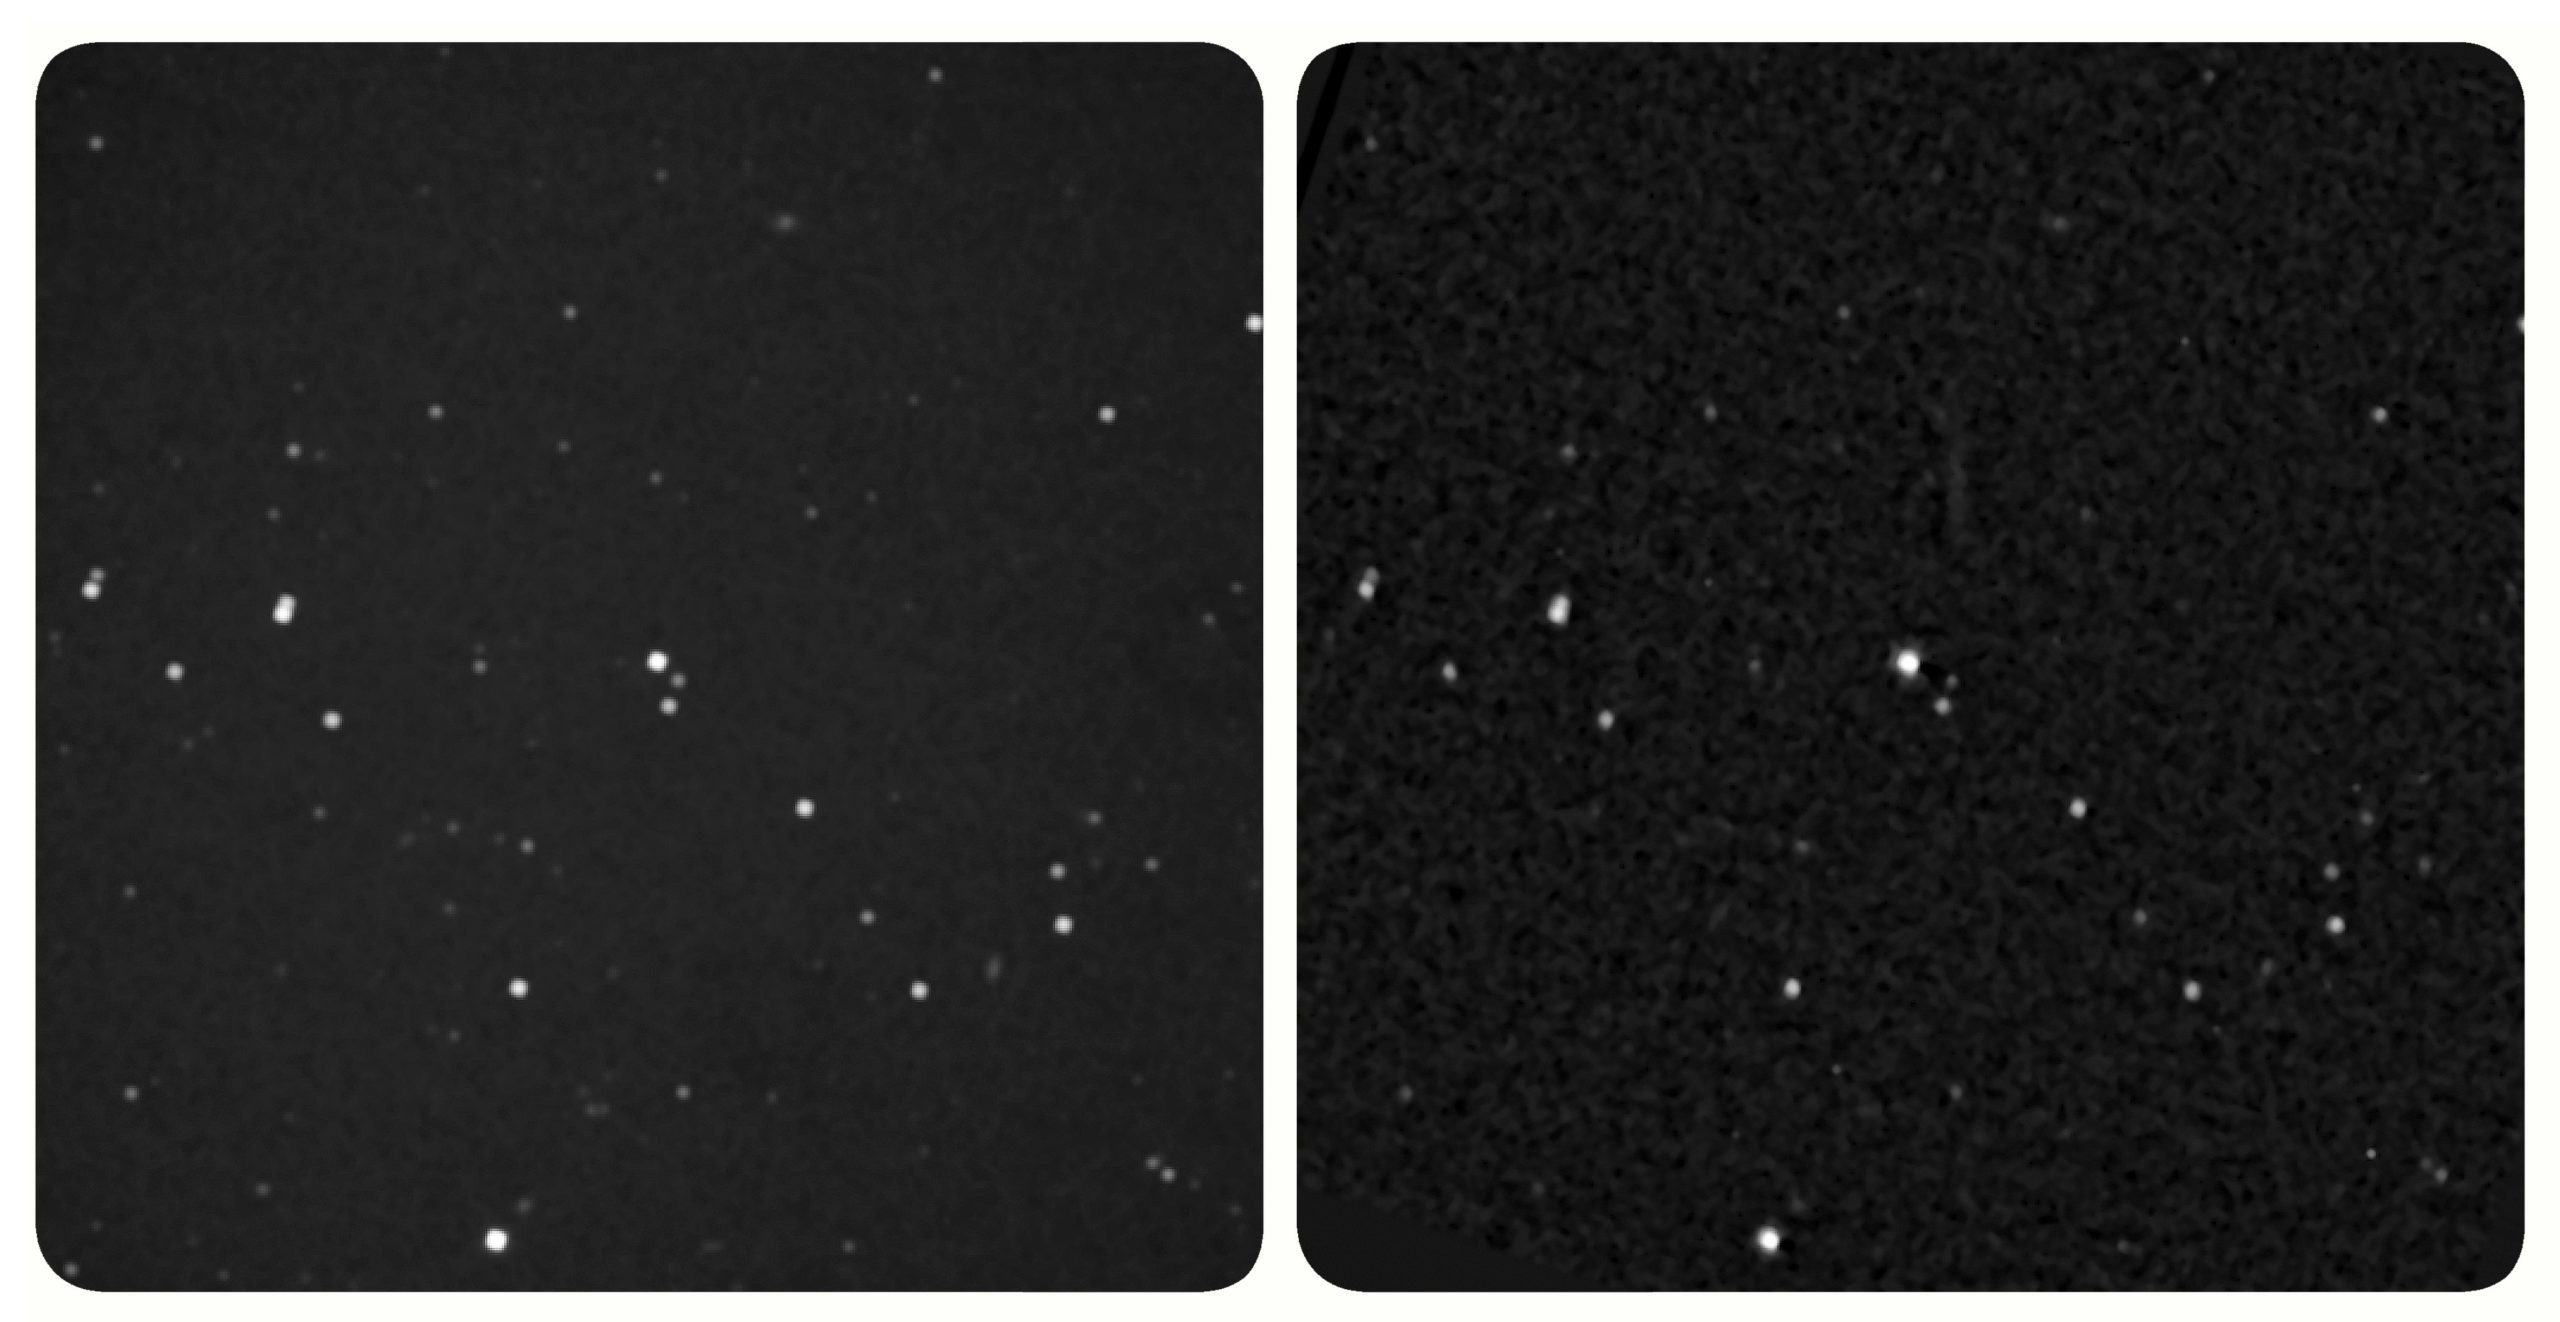 The parallax view of Wolf 359. The New Horizons image is on the left. (Image: NASA)